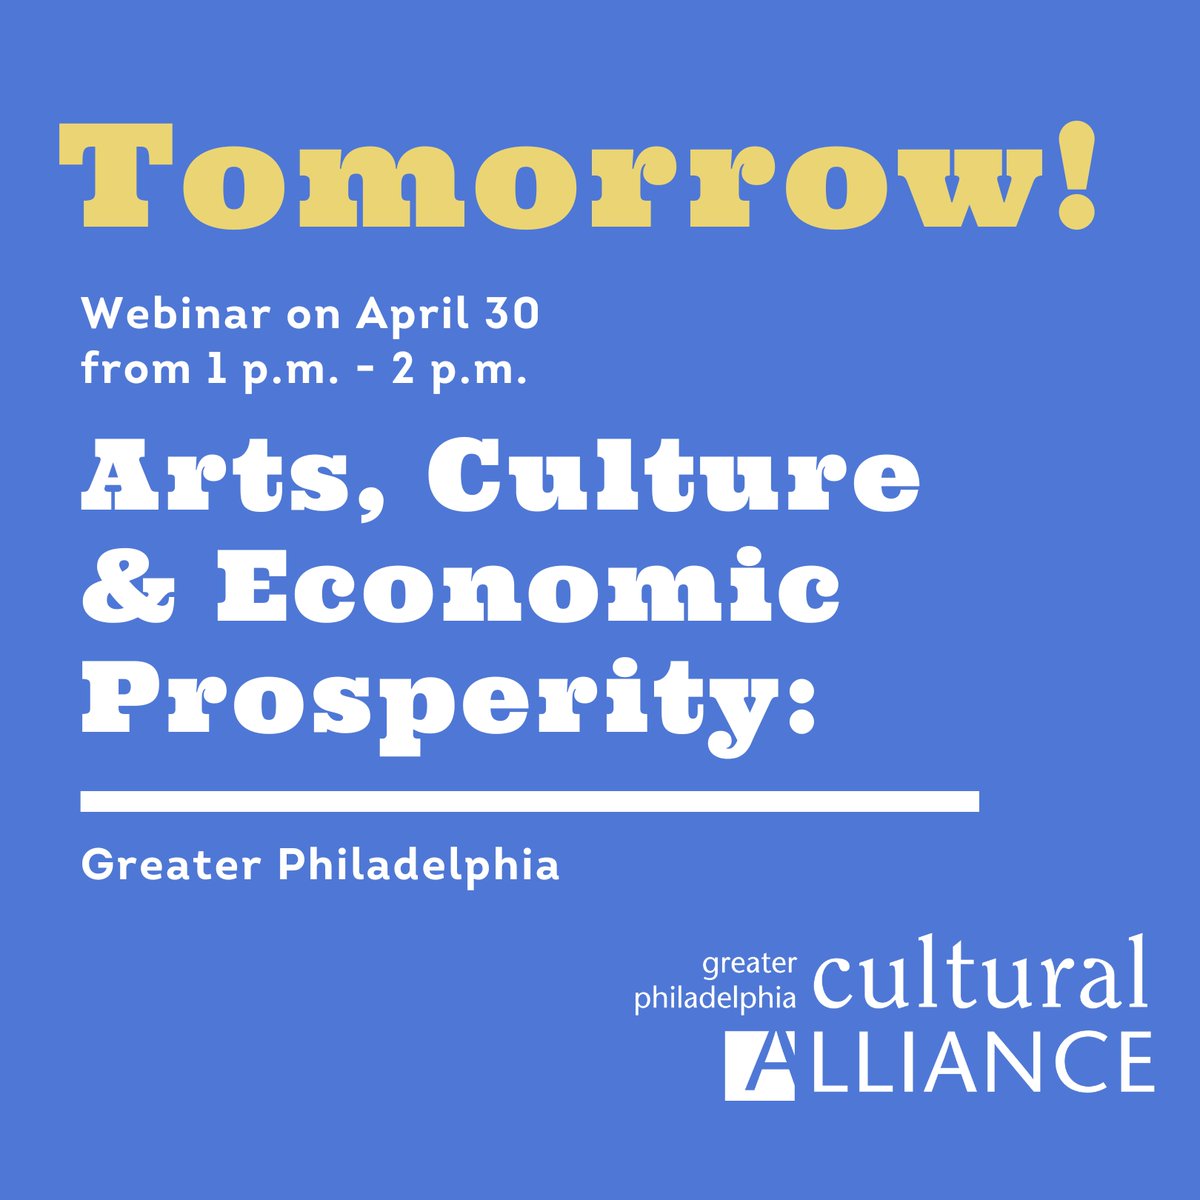 Join us tomorrow for our informational webinar on Arts, Culture & Economic Prosperity: Greater Philadelphia! There is still time to sign up at philaculture.org/prosperity